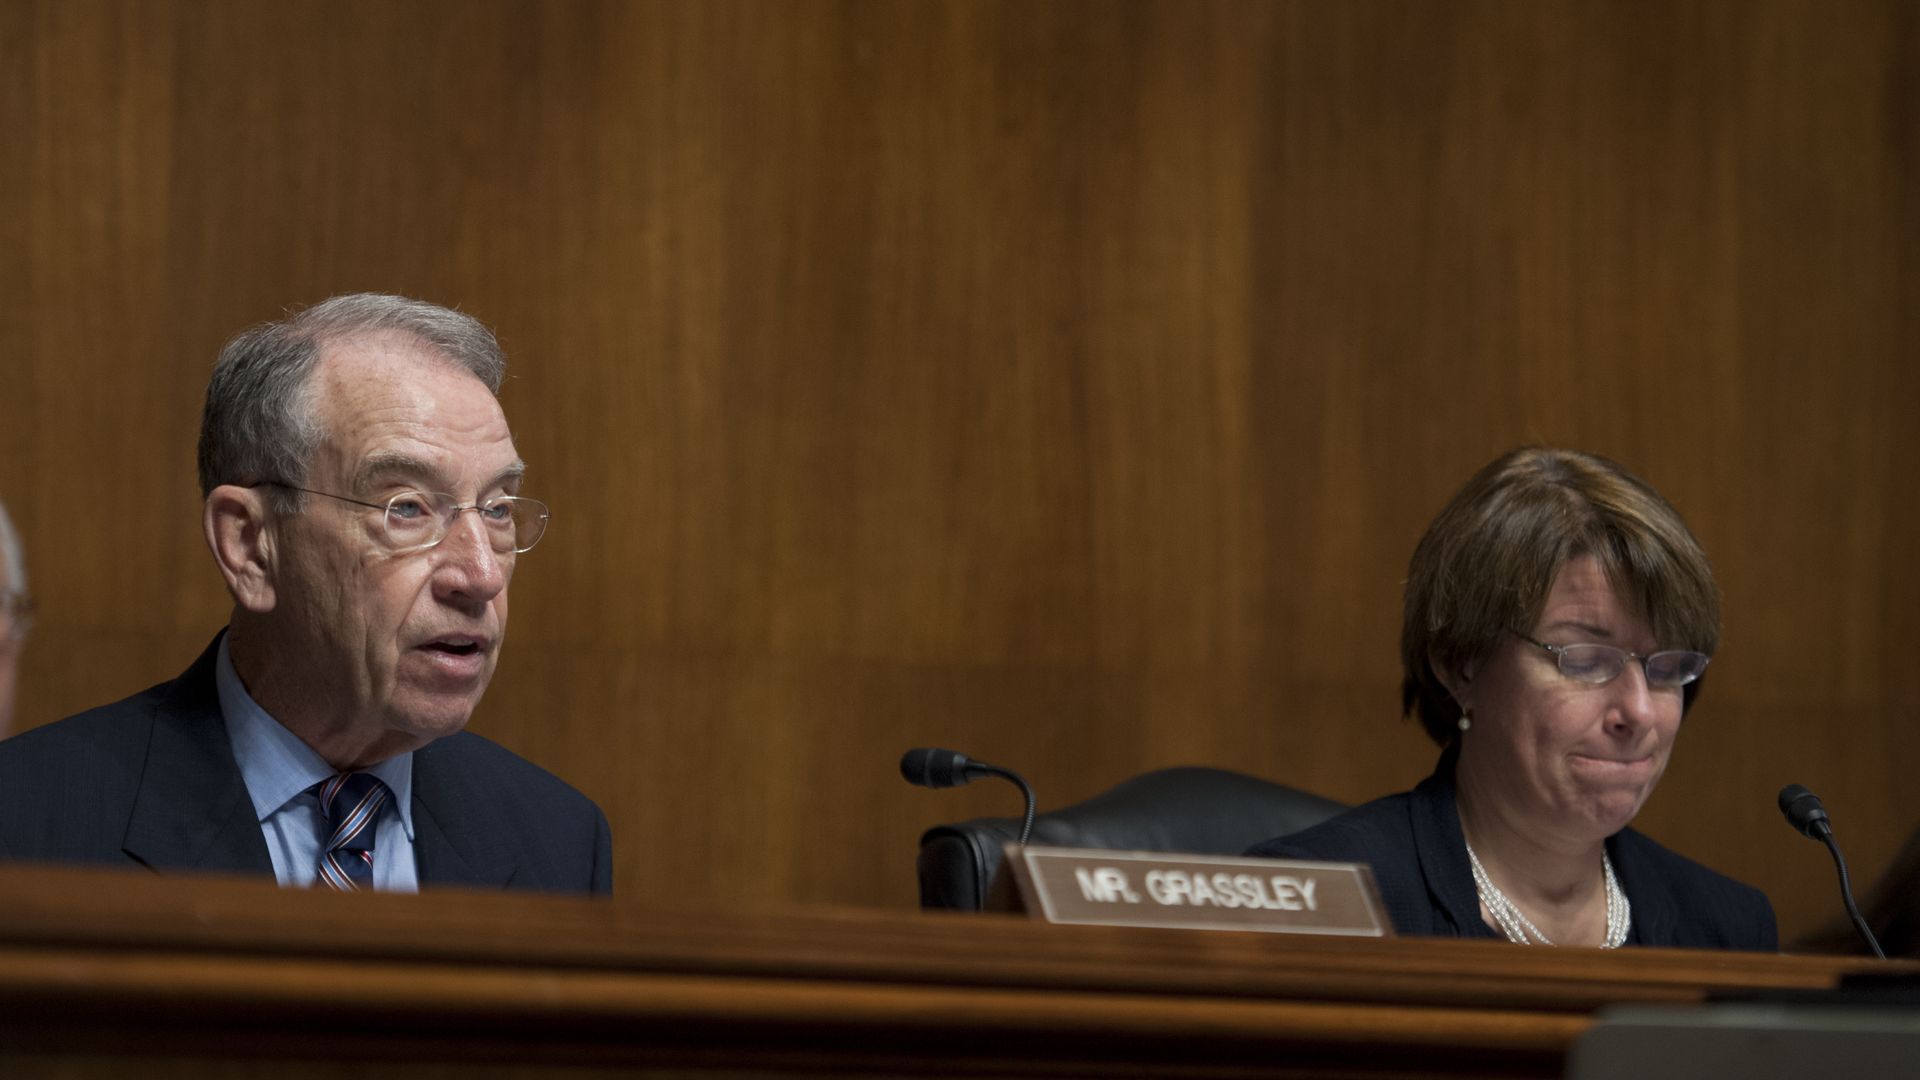 Chuck Grassley and Amy Klobuchar at a Senate committee hearing.